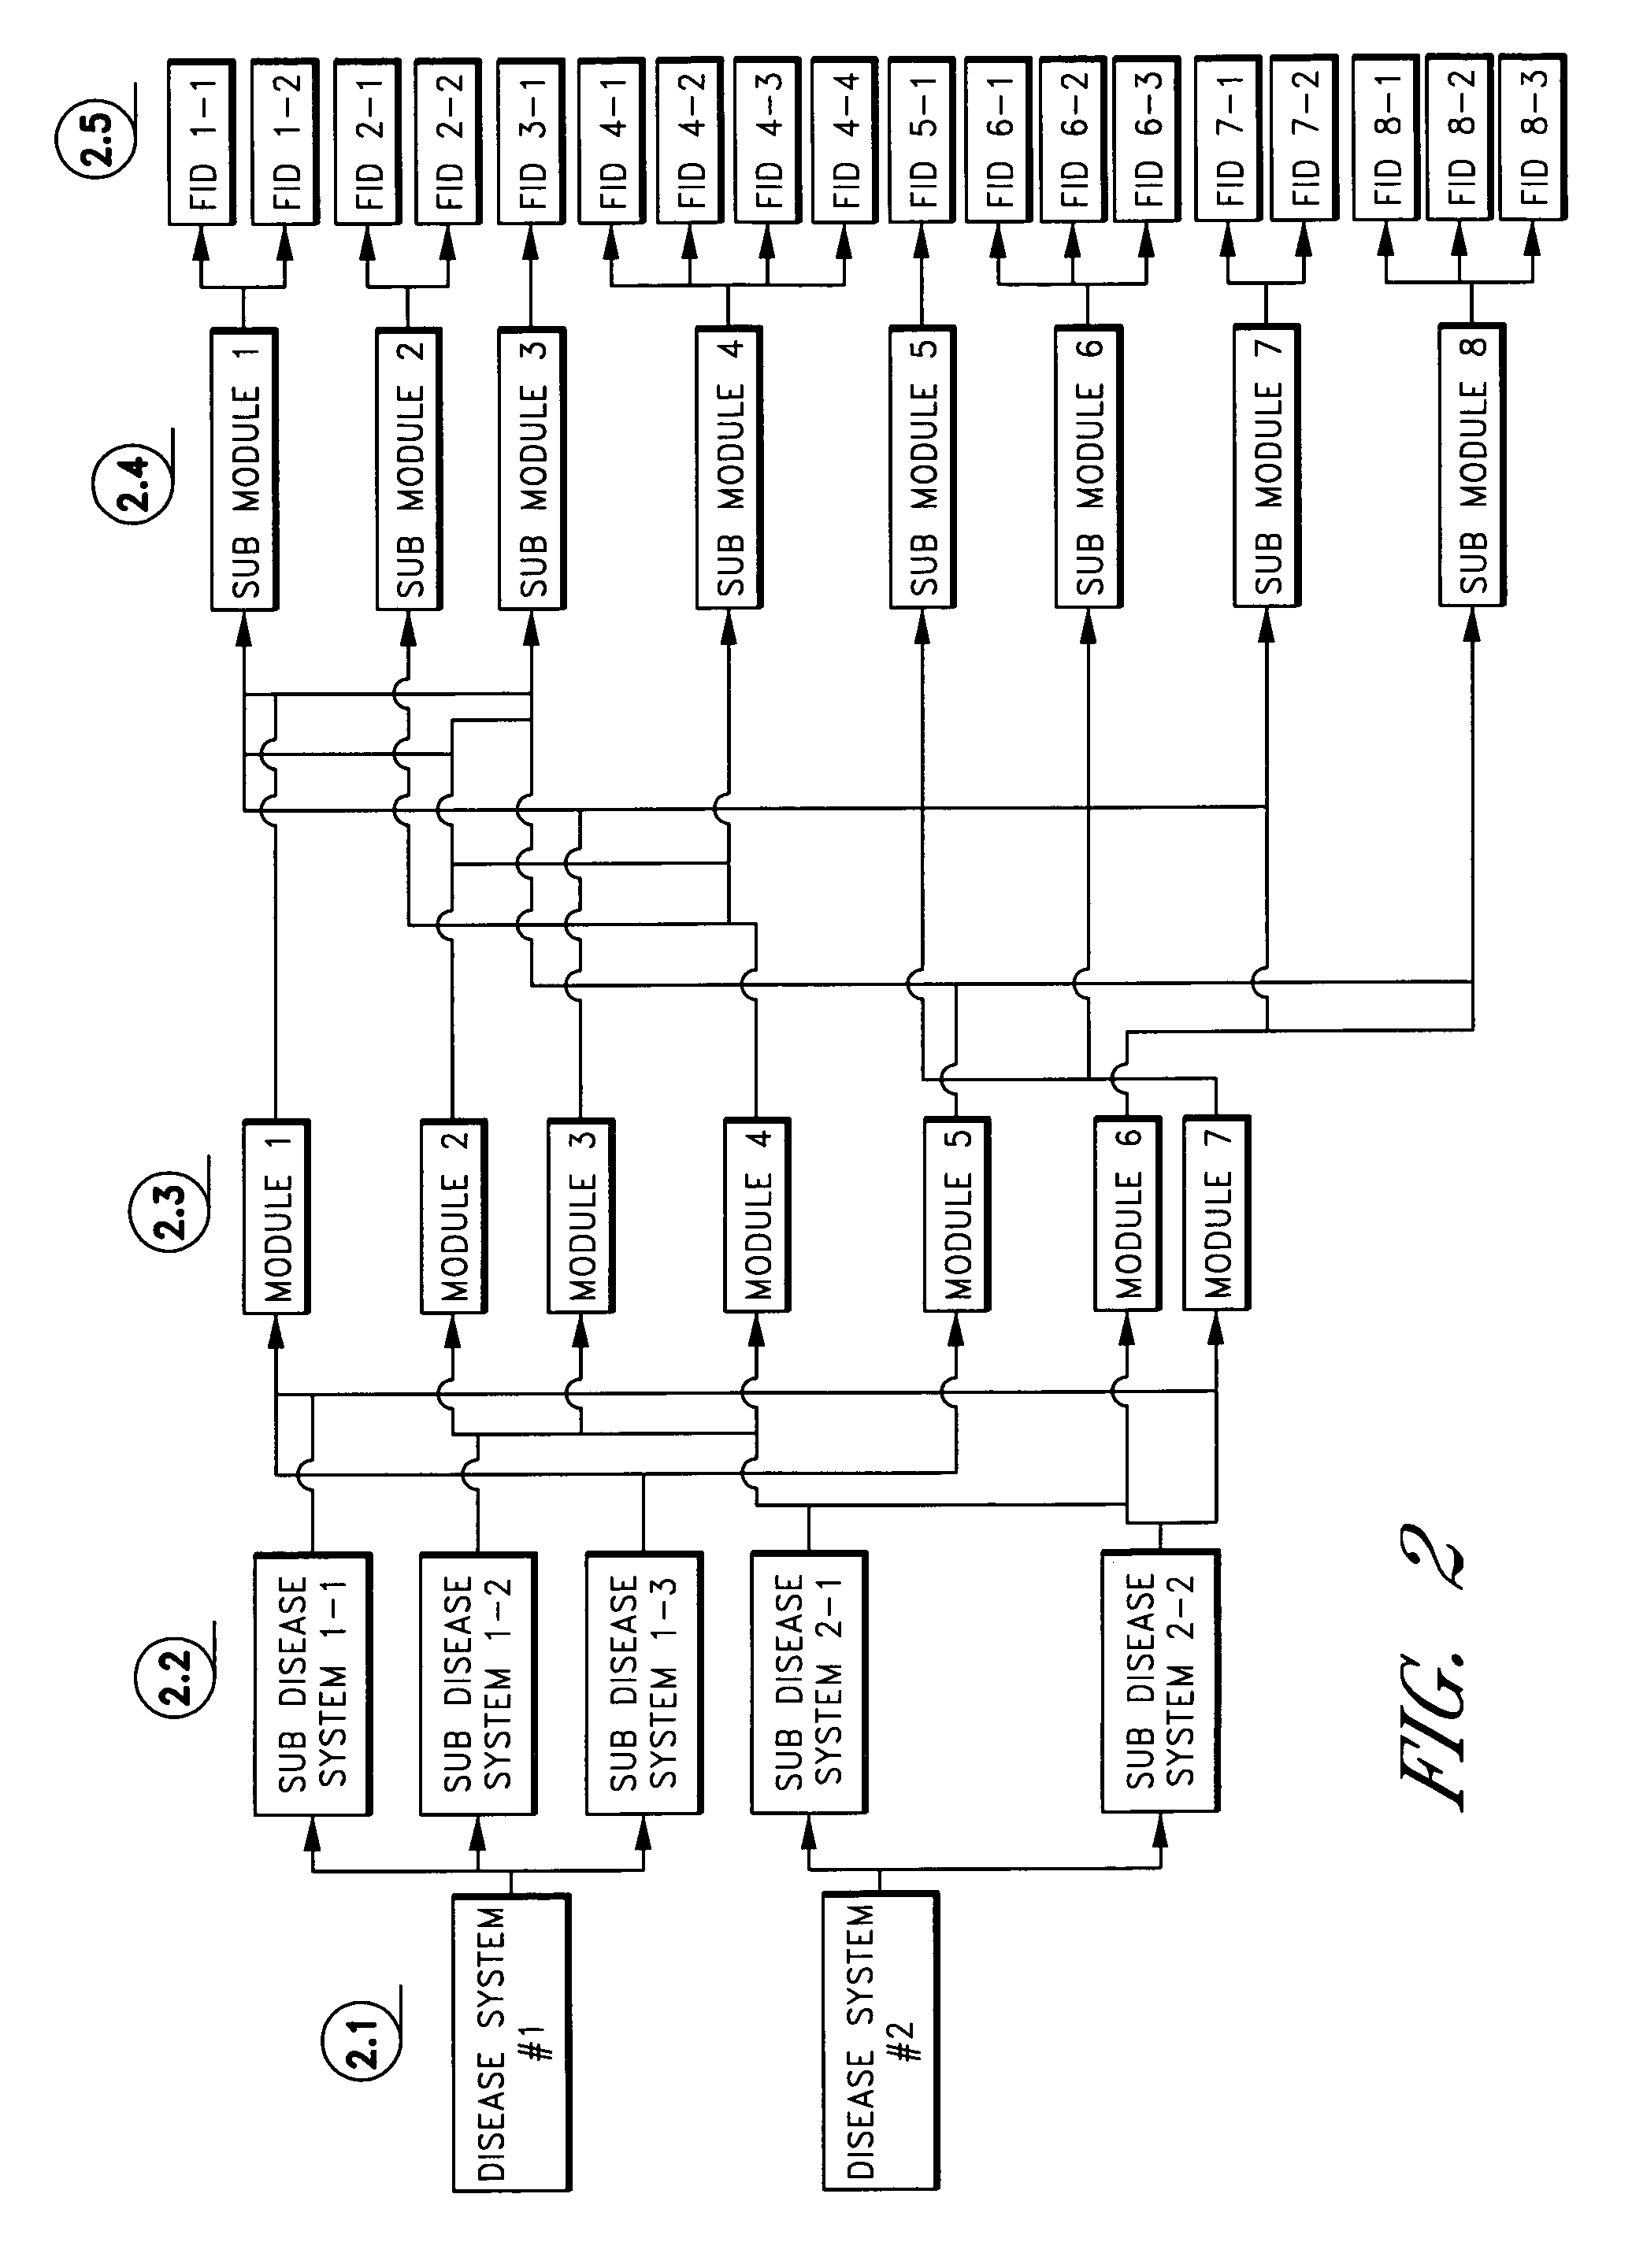 Method of automated processing of medical data for insurance and disability determinations